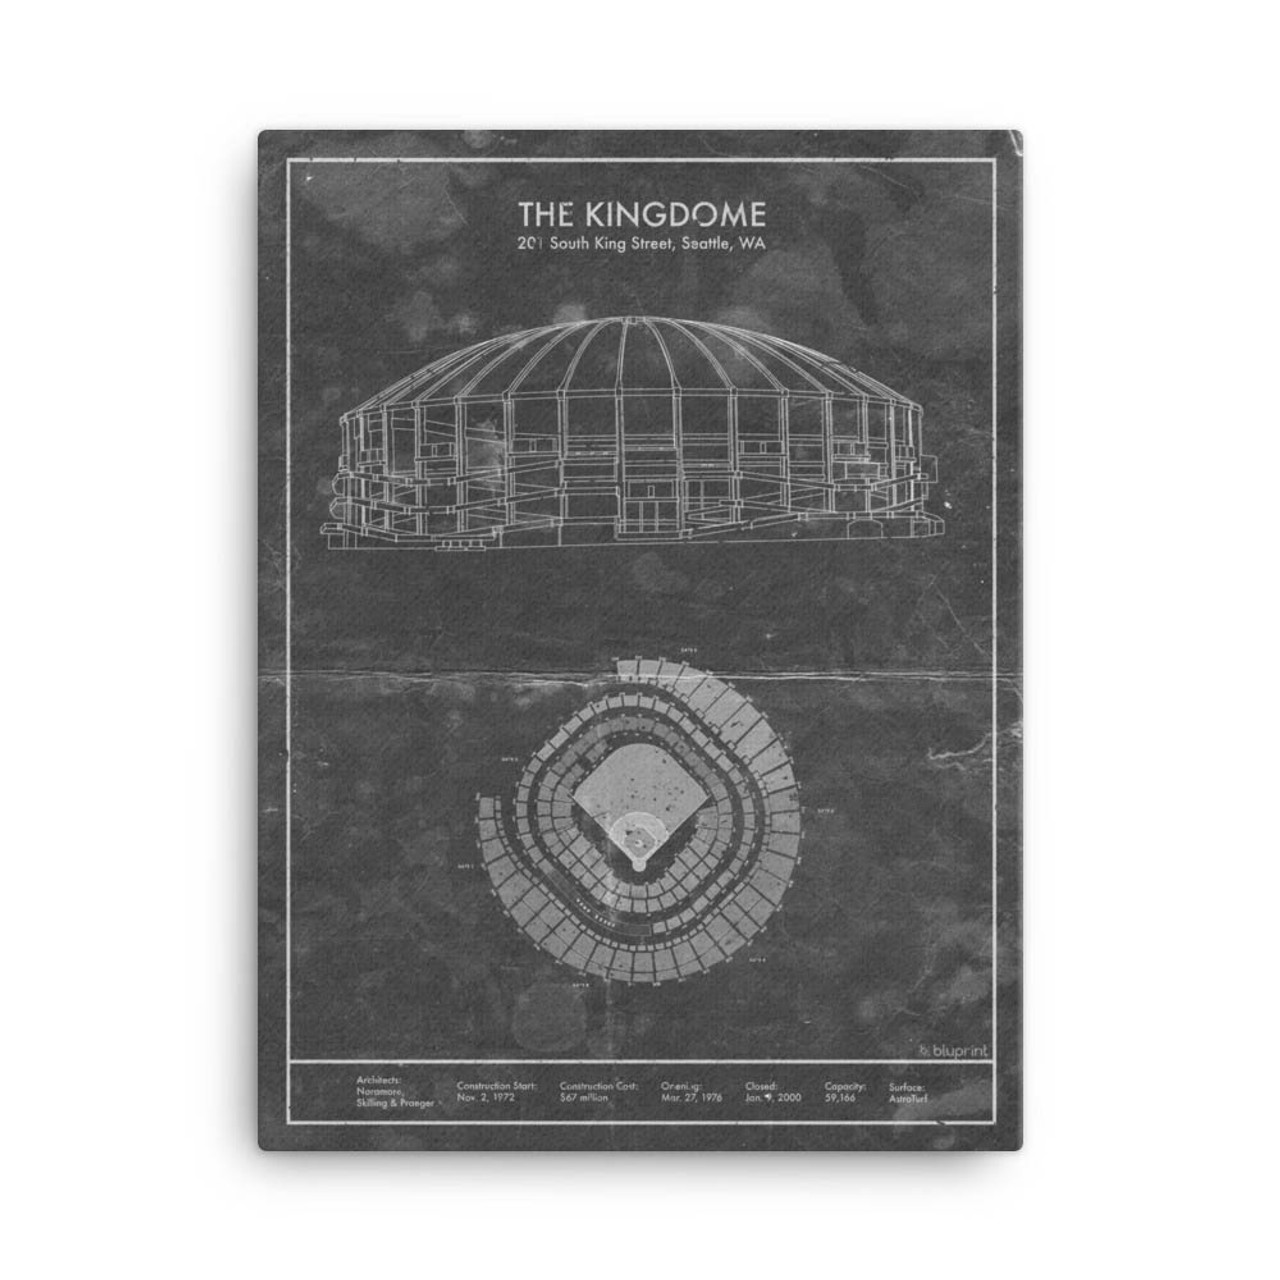 Kingdome - Seattle Mariners Architecture Poster